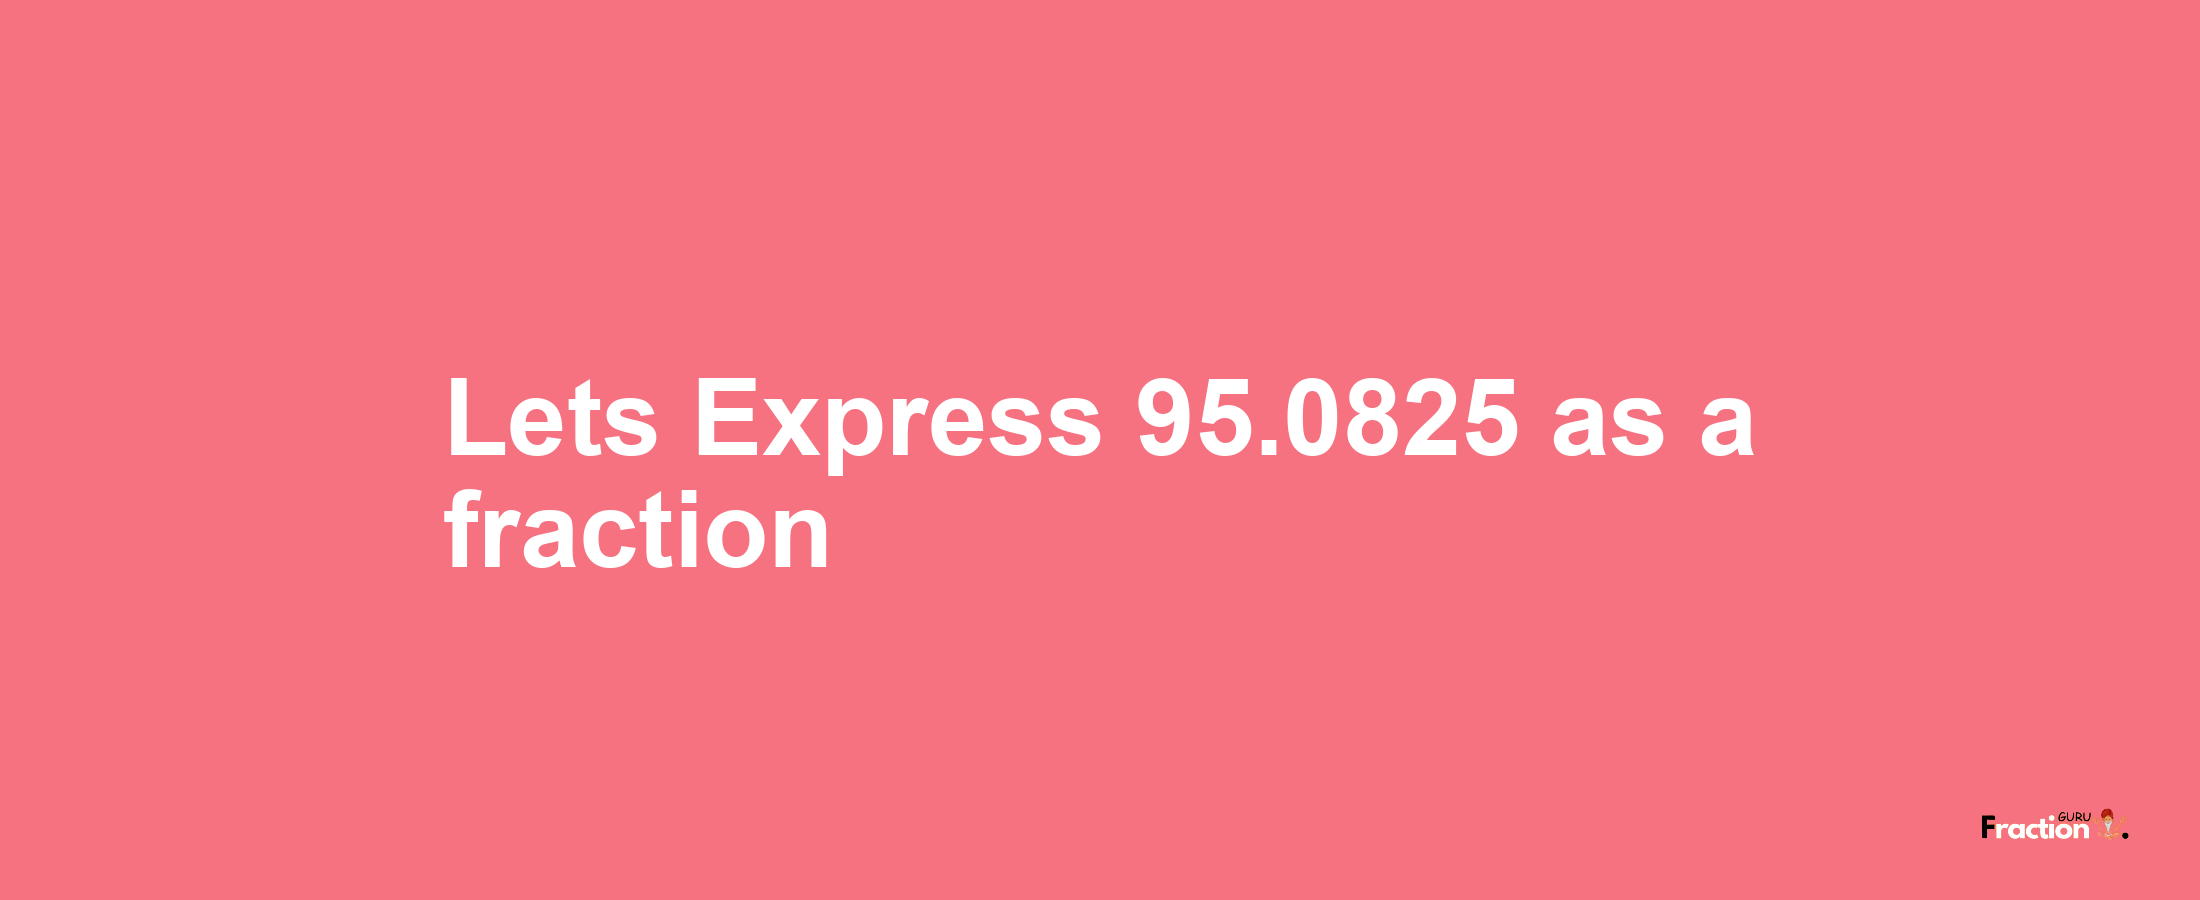 Lets Express 95.0825 as afraction